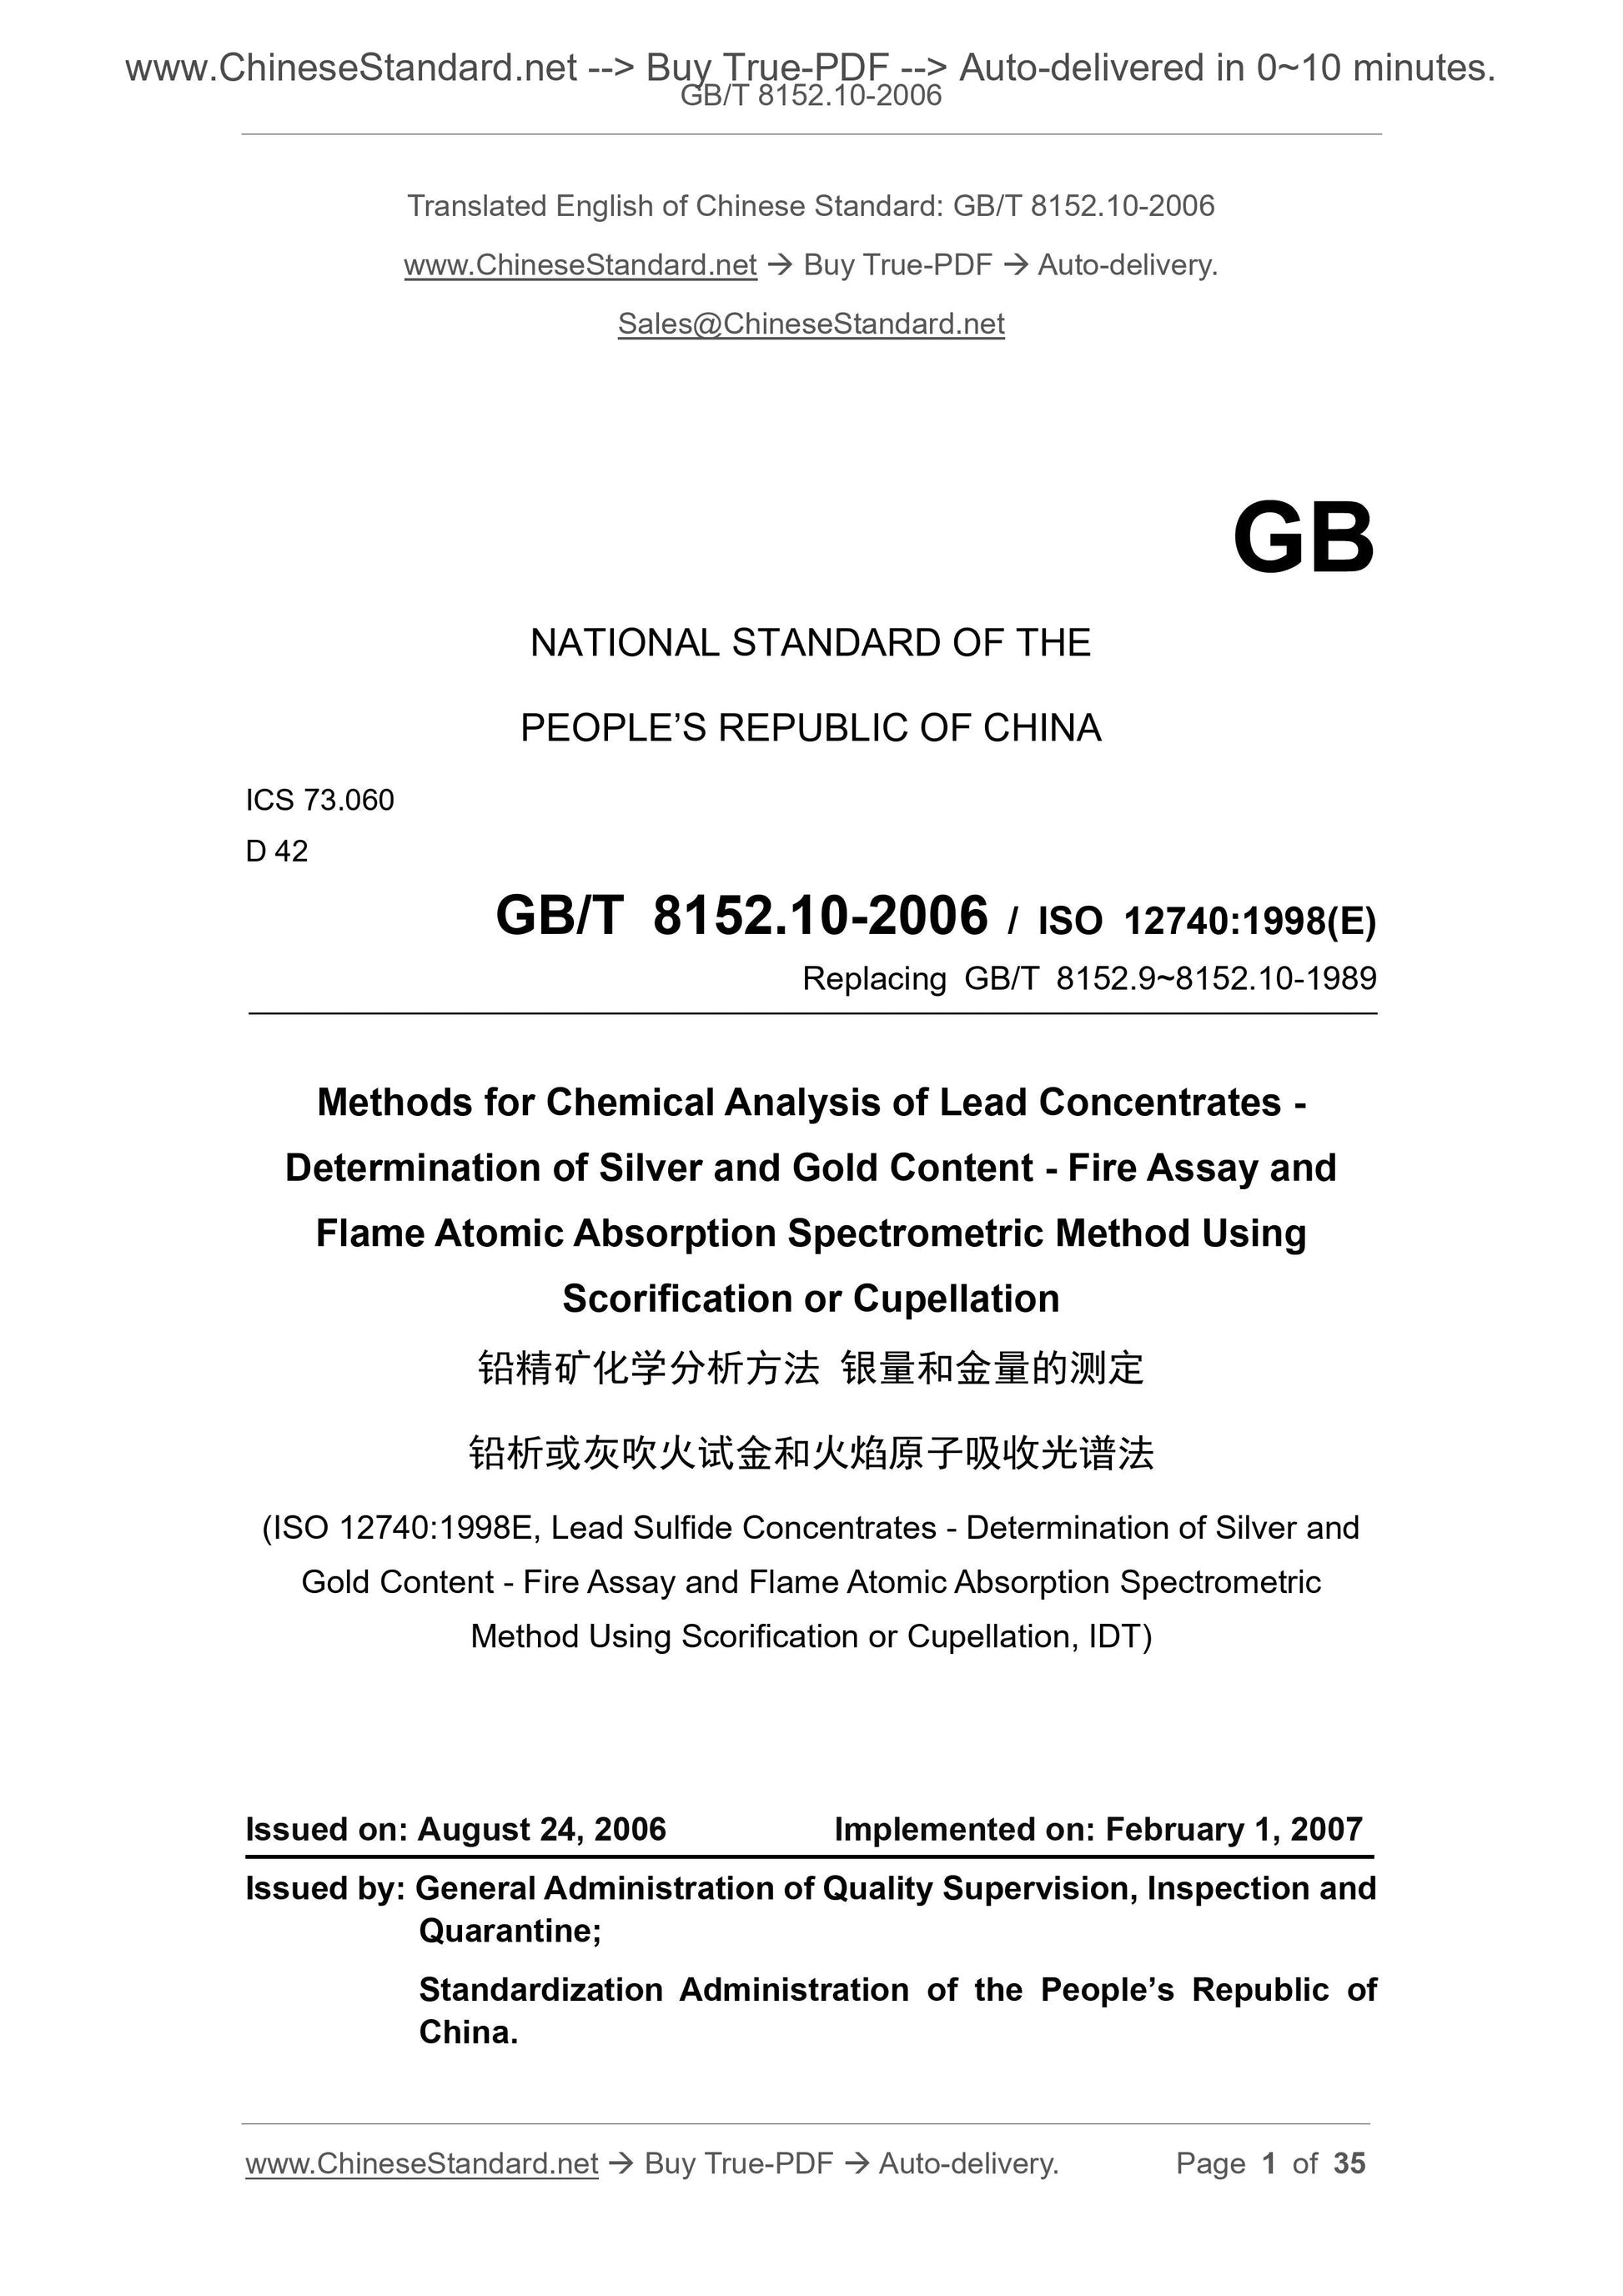 GB/T 8152.10-2006 Page 1